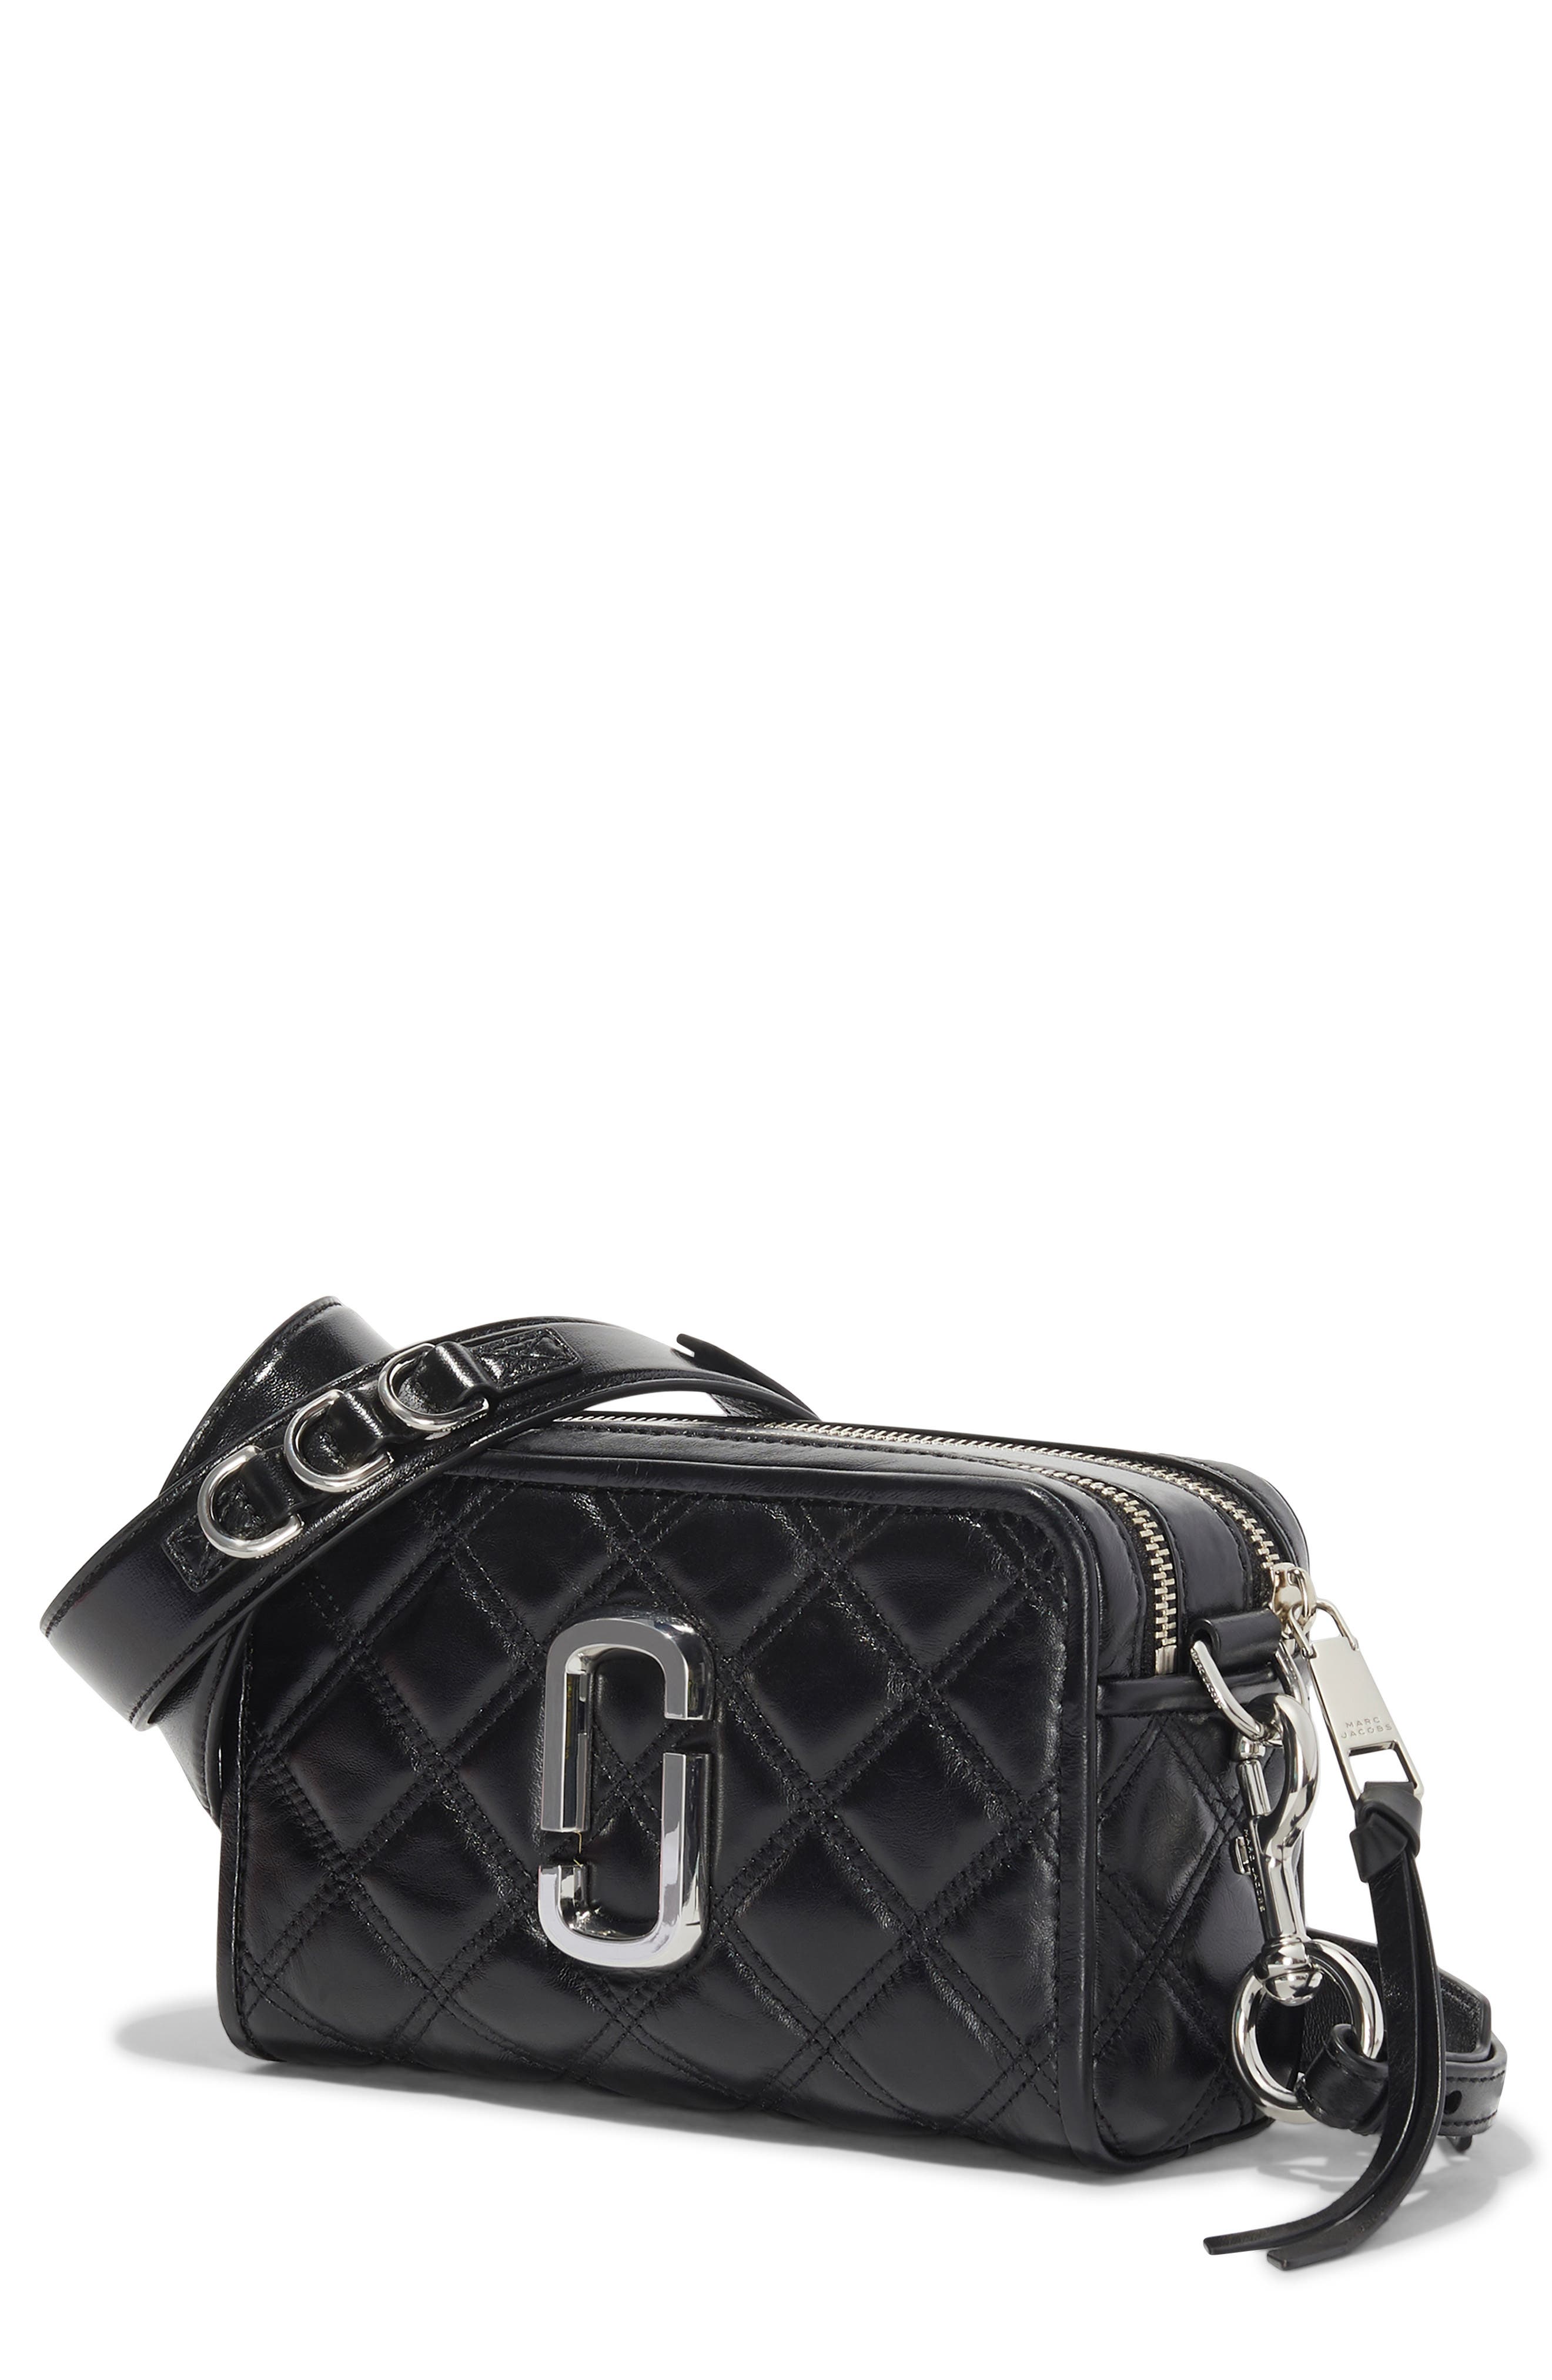 quilted leather handbags